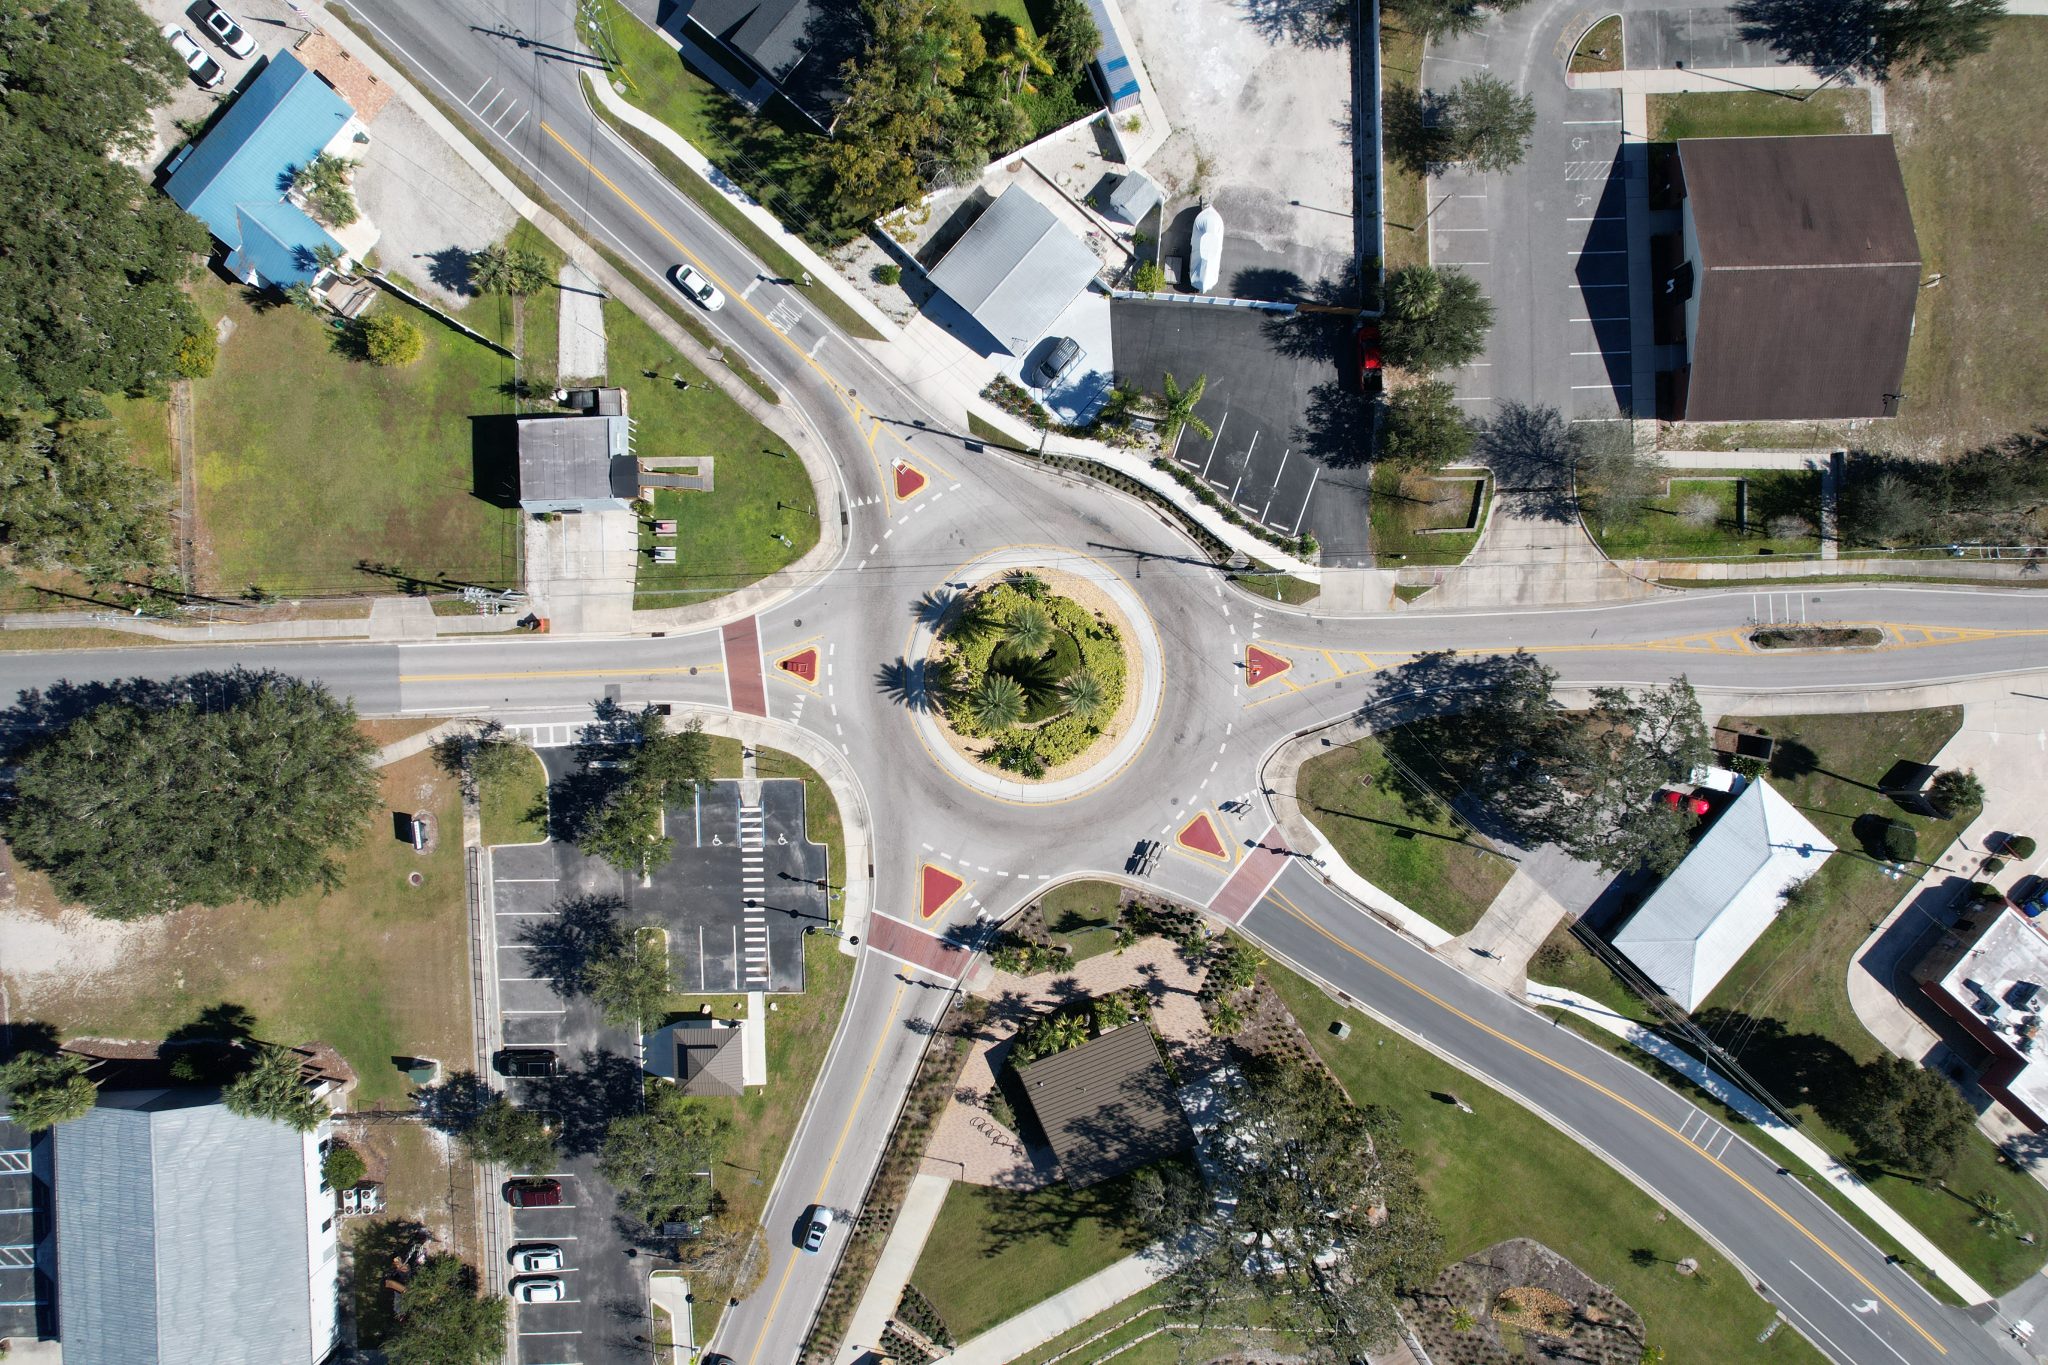 Aerial view of a five-way roundabout in a small downtown area